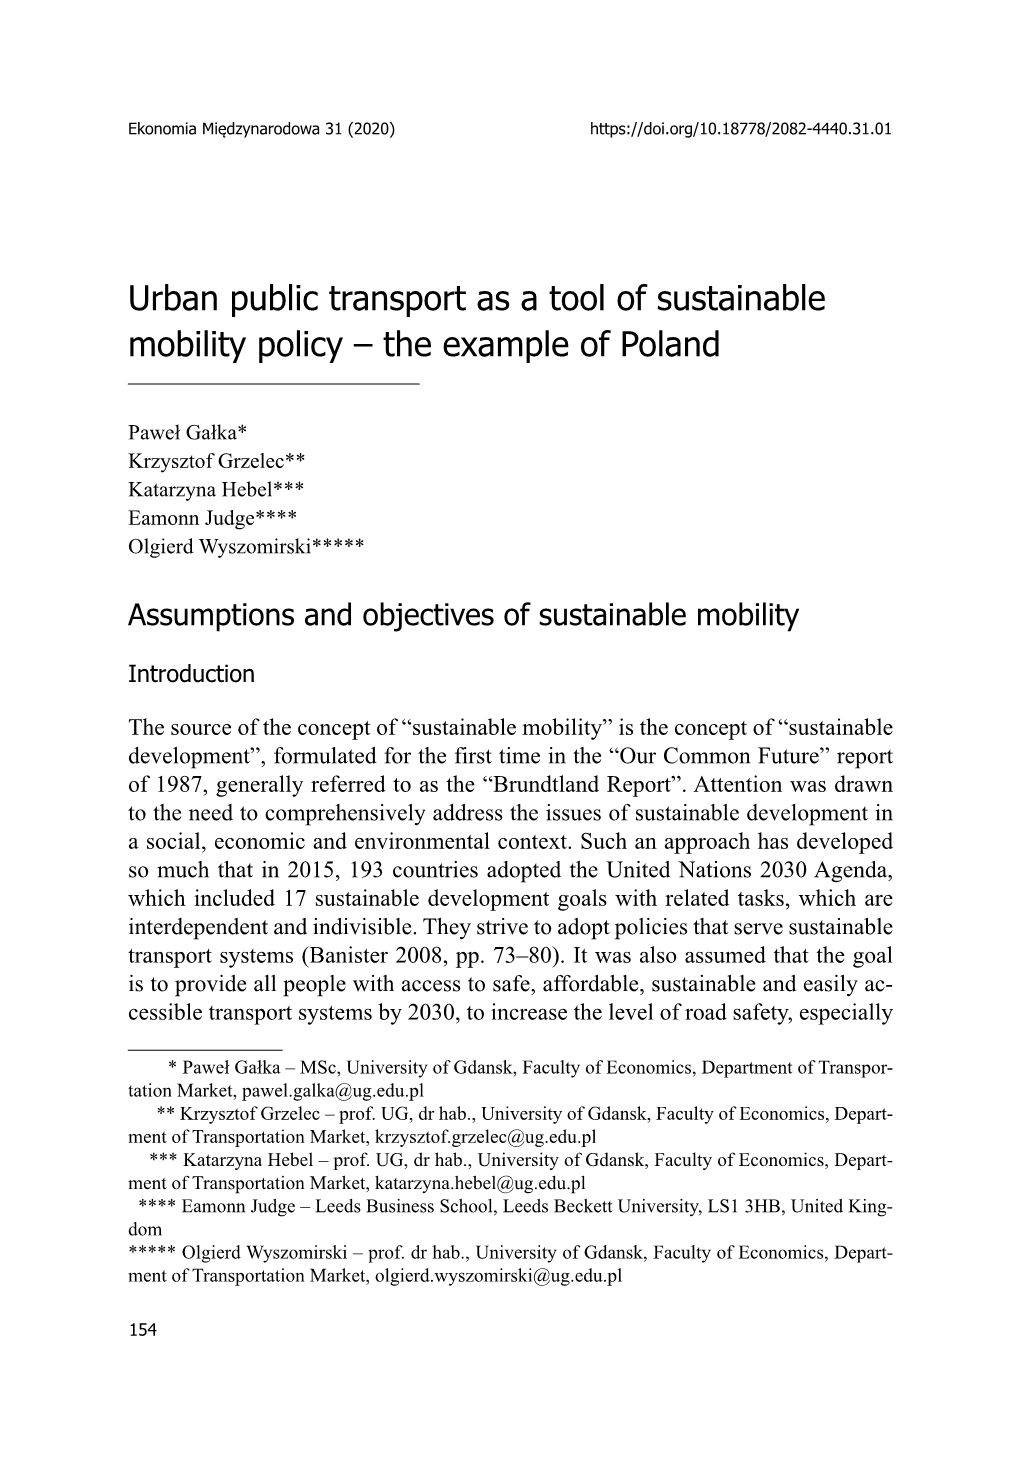 Urban Public Transport As a Tool of Sustainable Mobility Policy – the Example of Poland